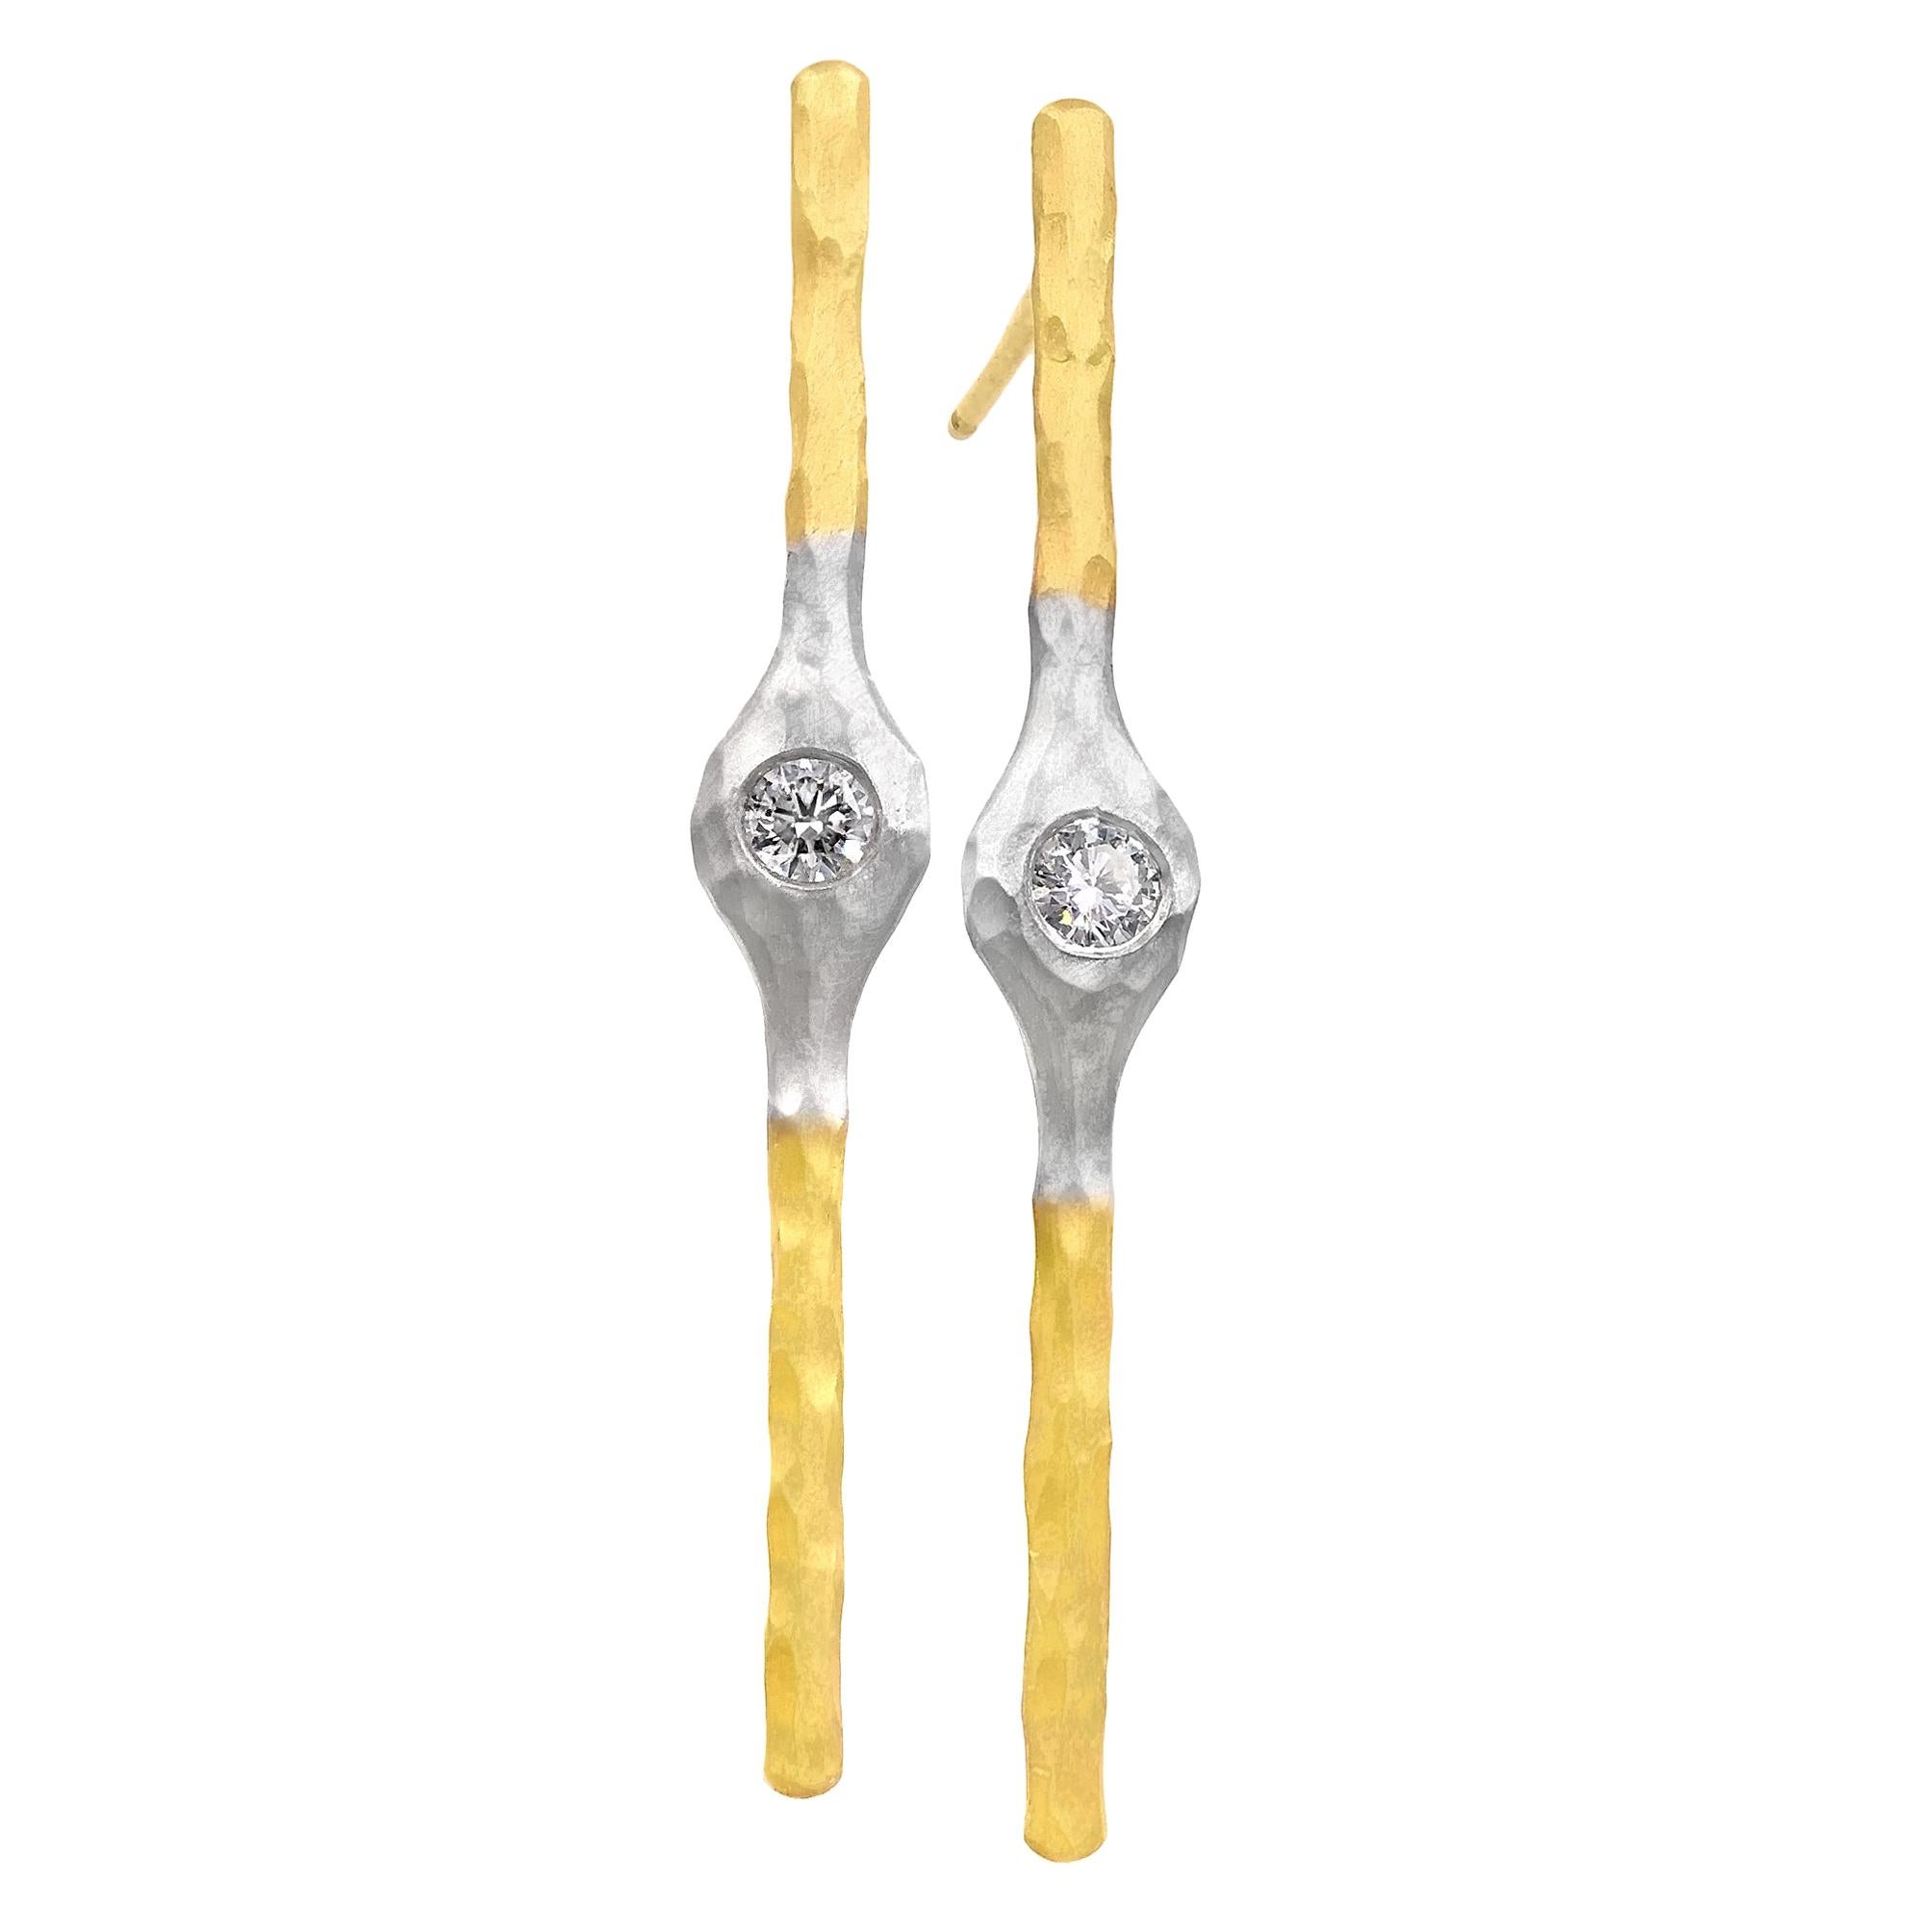 Pamela Froman White Diamond Yellow and White Hammered Gold Stick Earrings